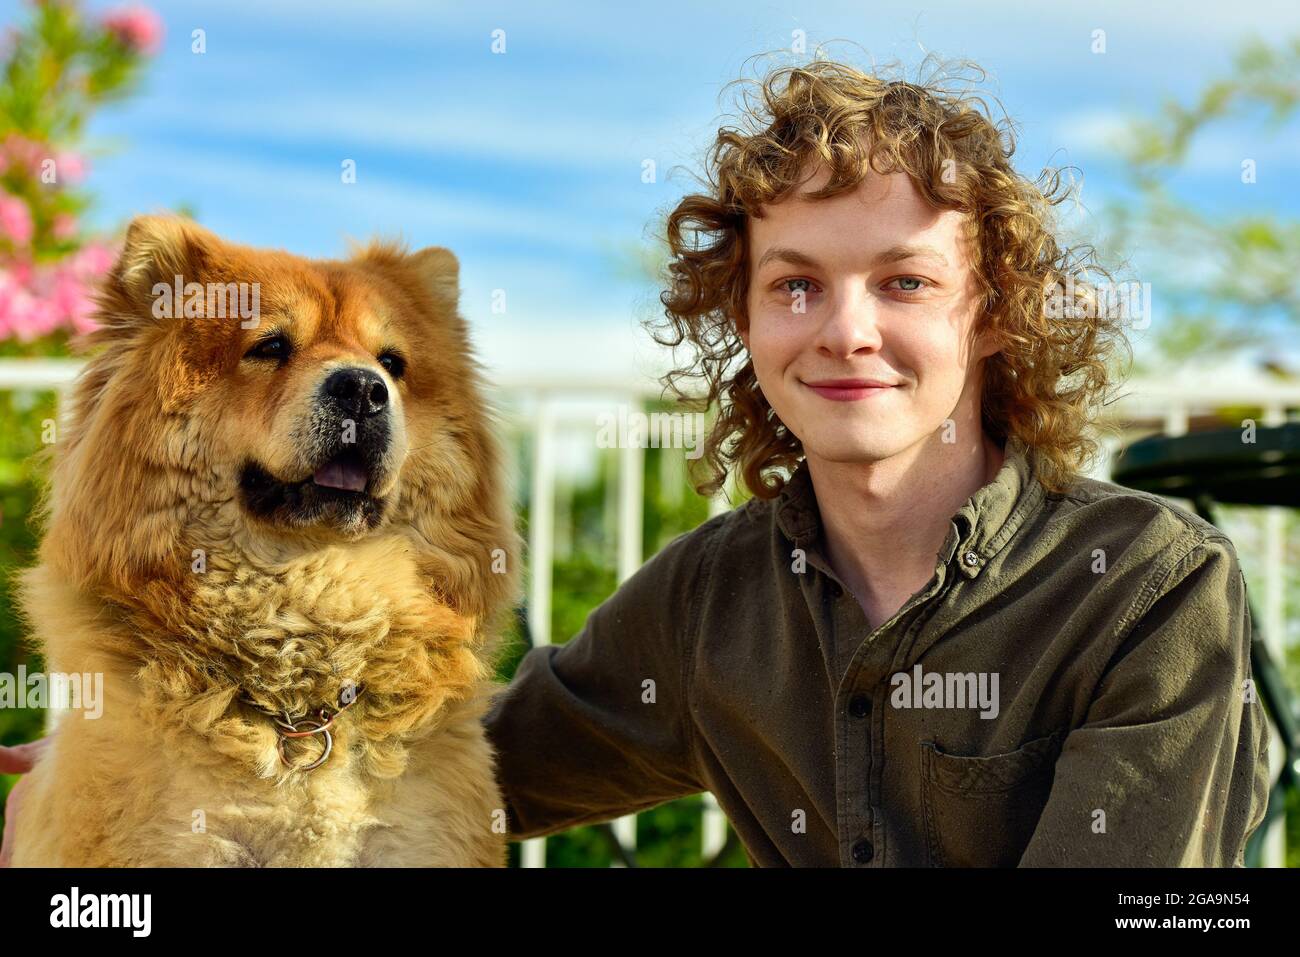 Portrait of a young man with a Chow Chow breed dog Stock Photo